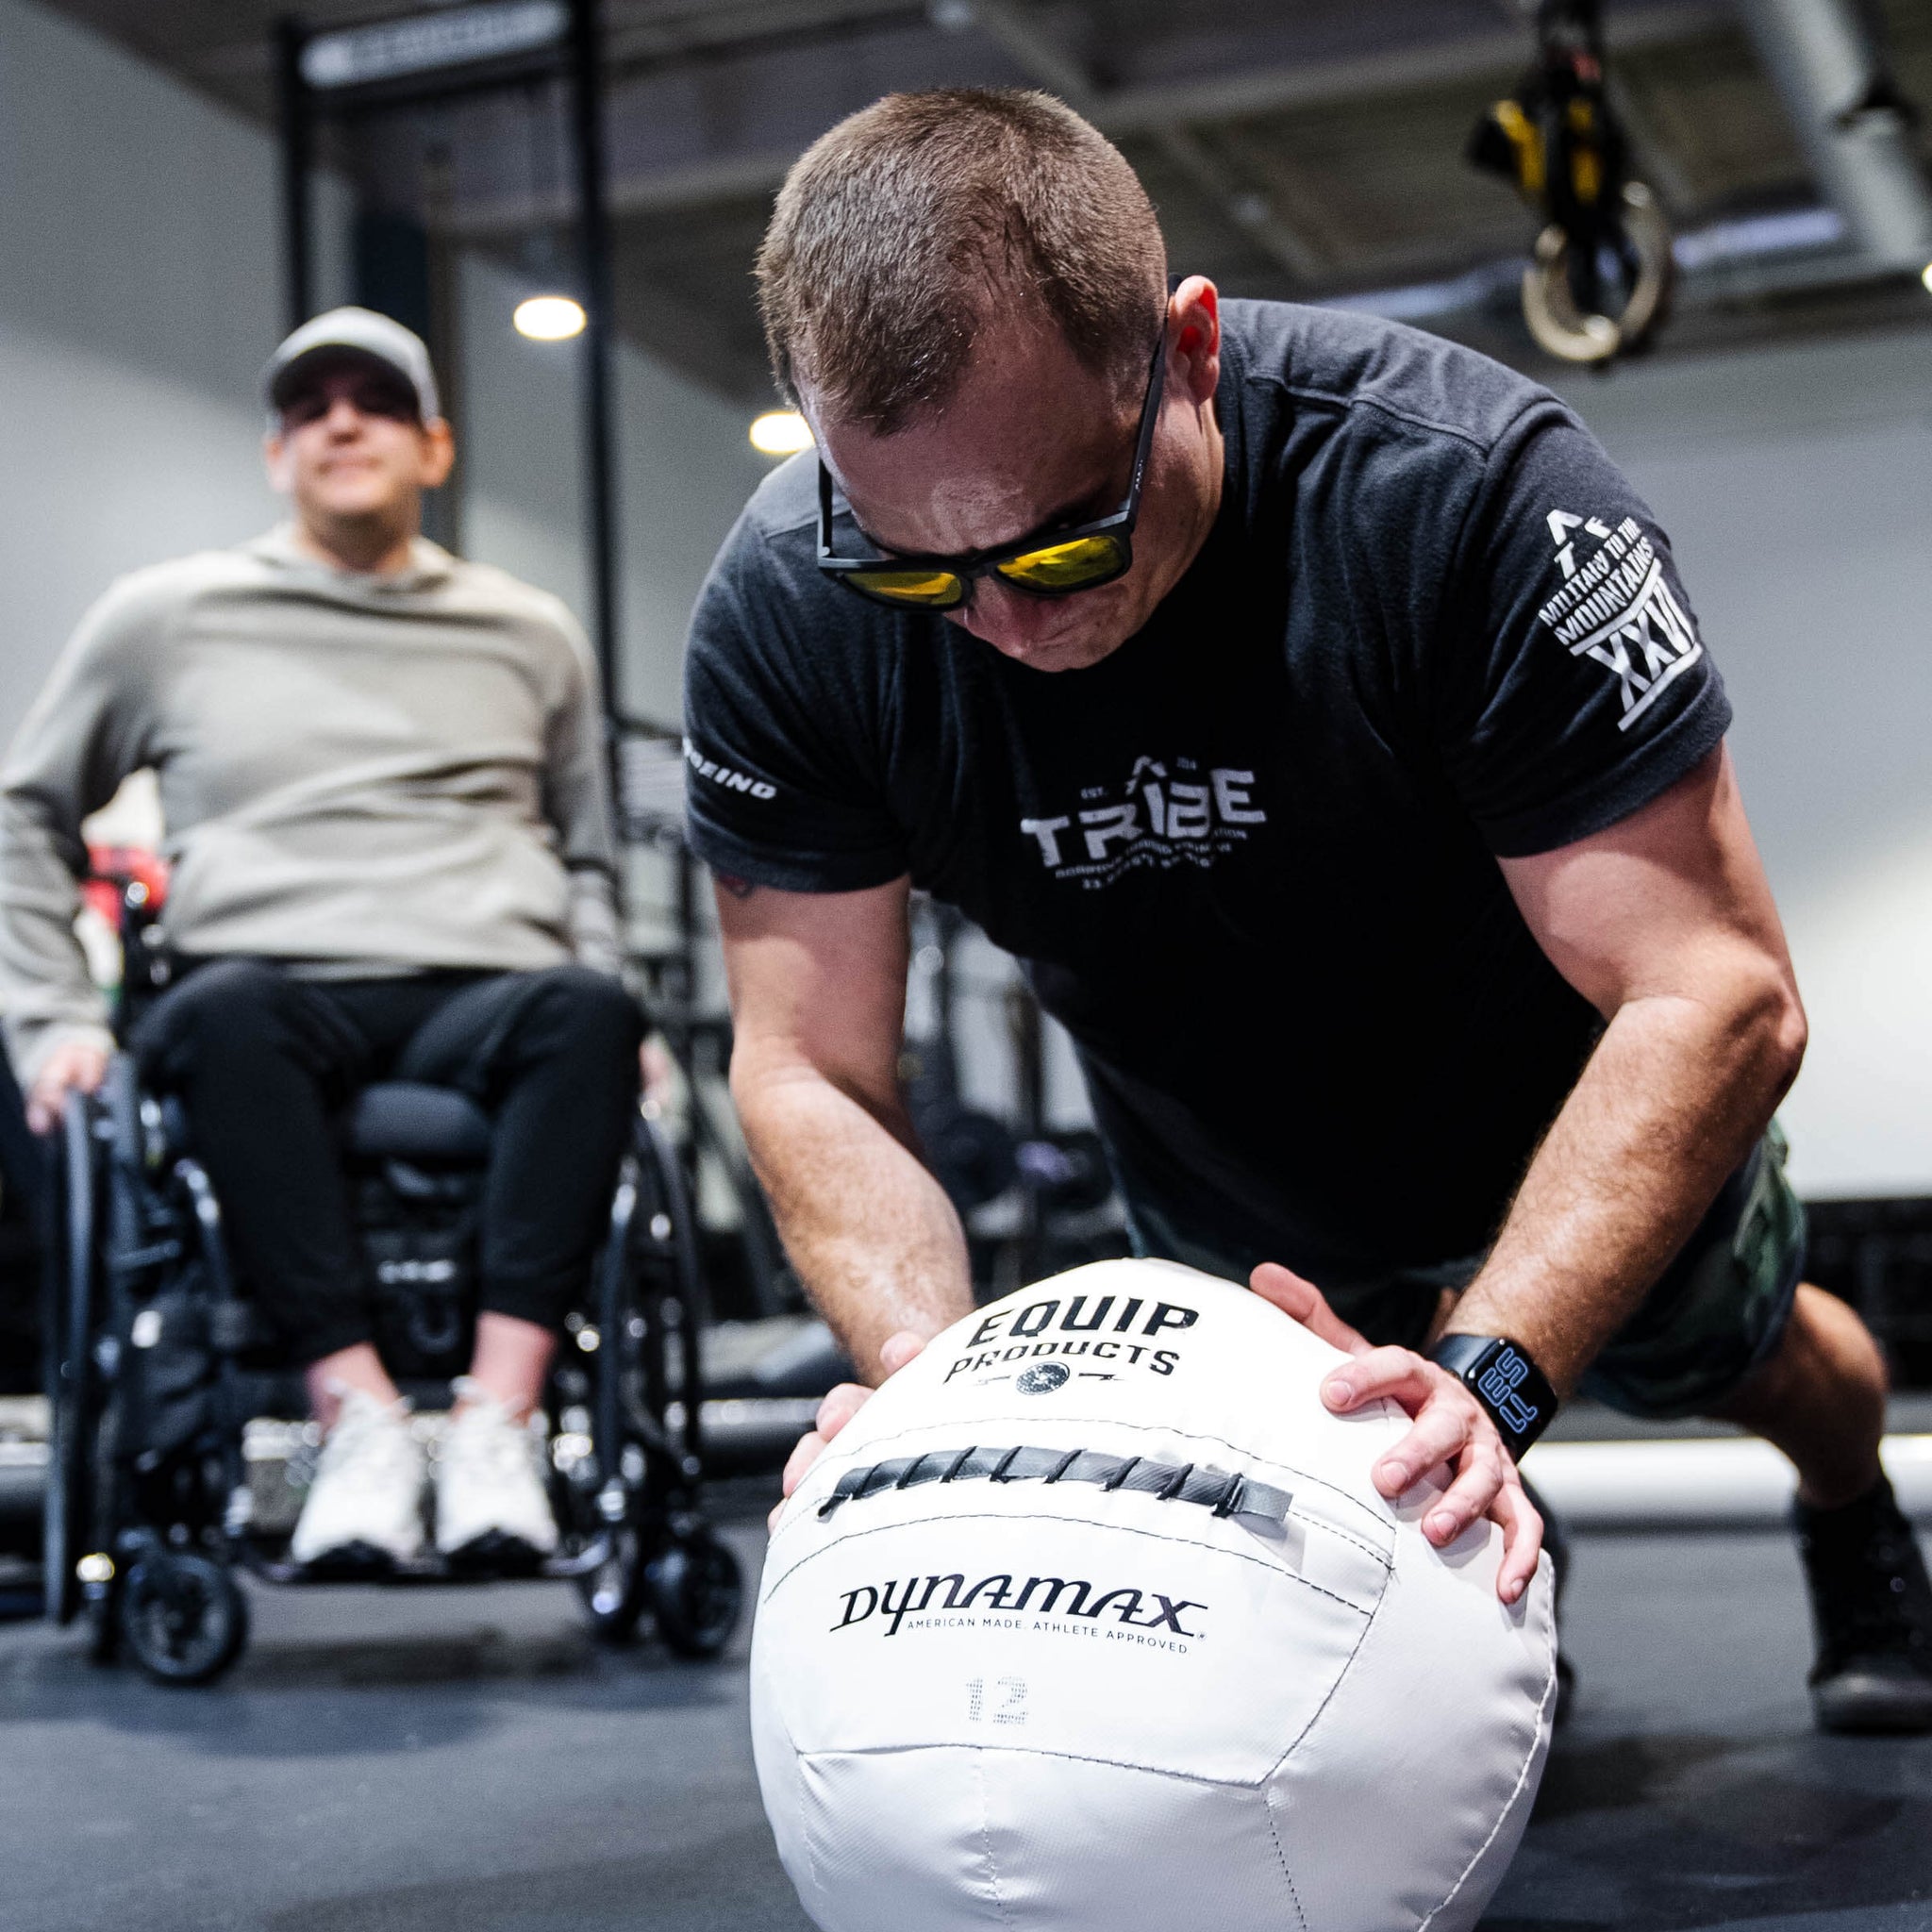 A Visually Impaired Man on how knees leaning on an Equip - Dynamax White Wall ball in a gym